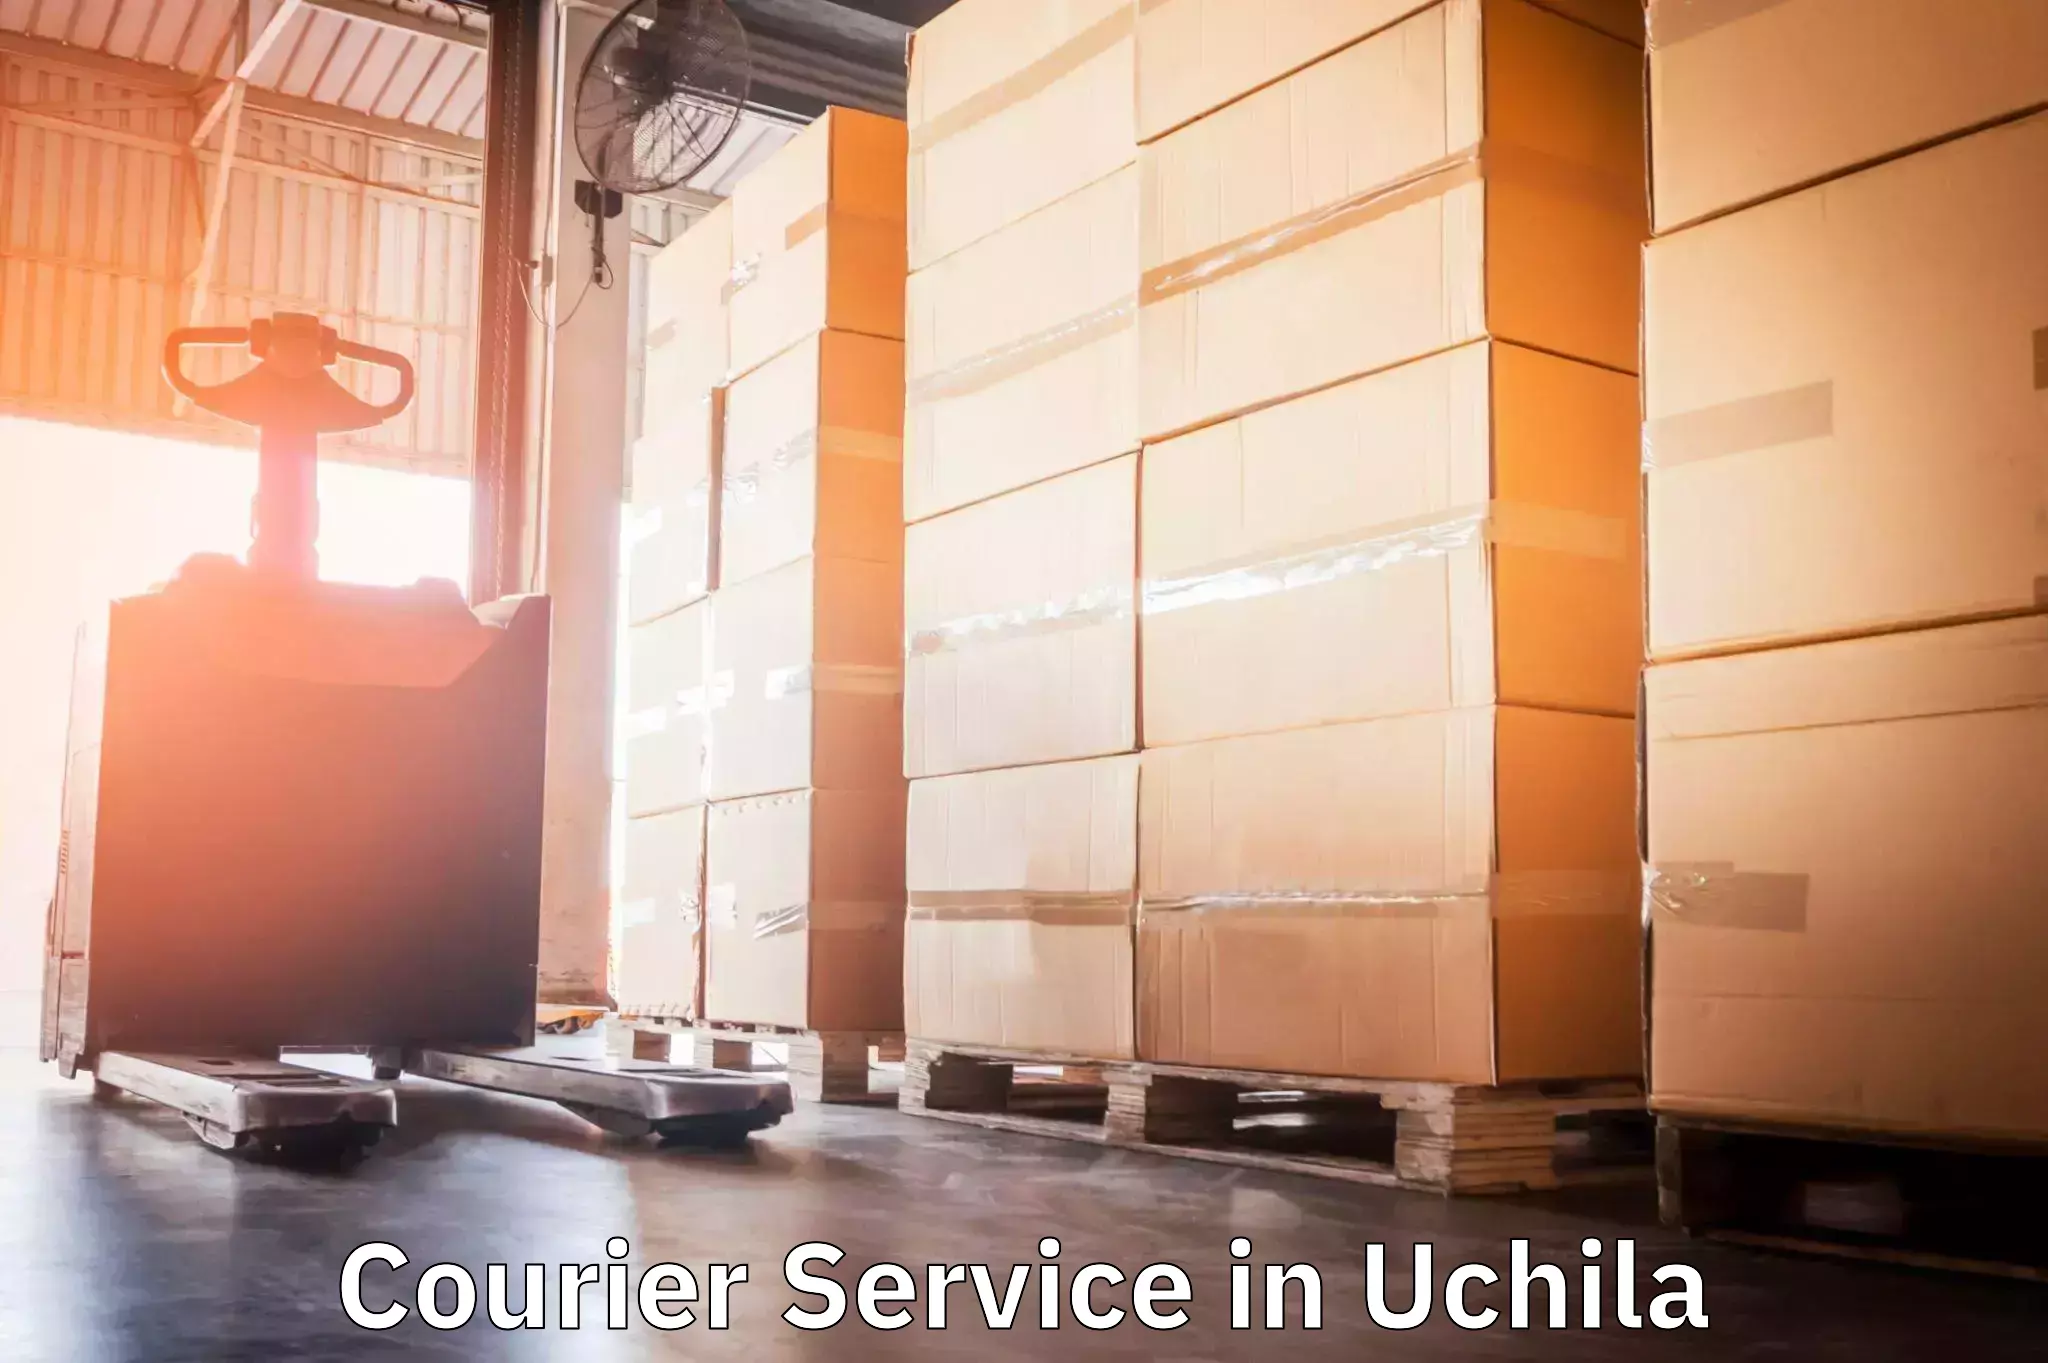 24-hour courier service in Uchila